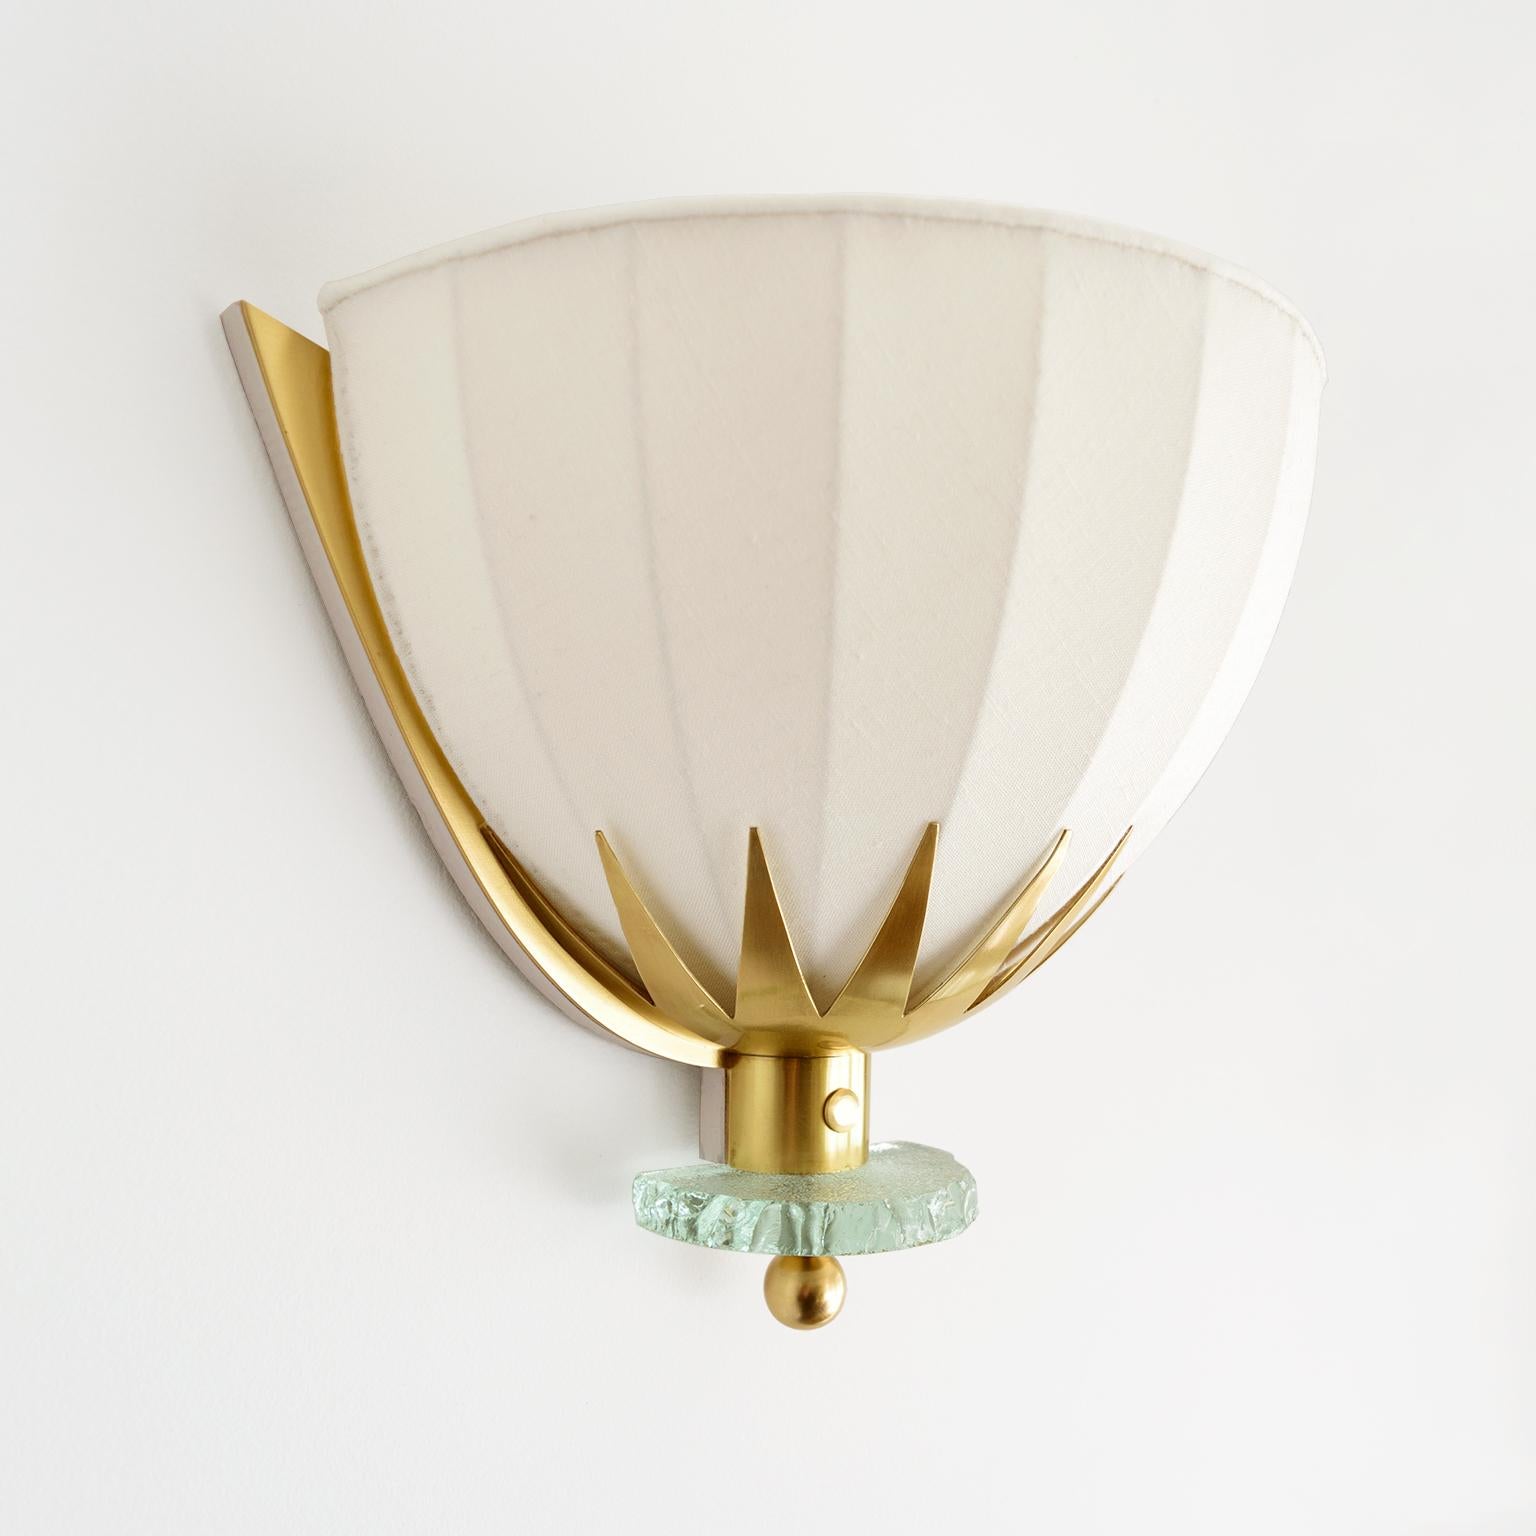 20th Century Swedish Art Deco, Scandinavian Modern Brass and Glass Sconces with Fabric Shades